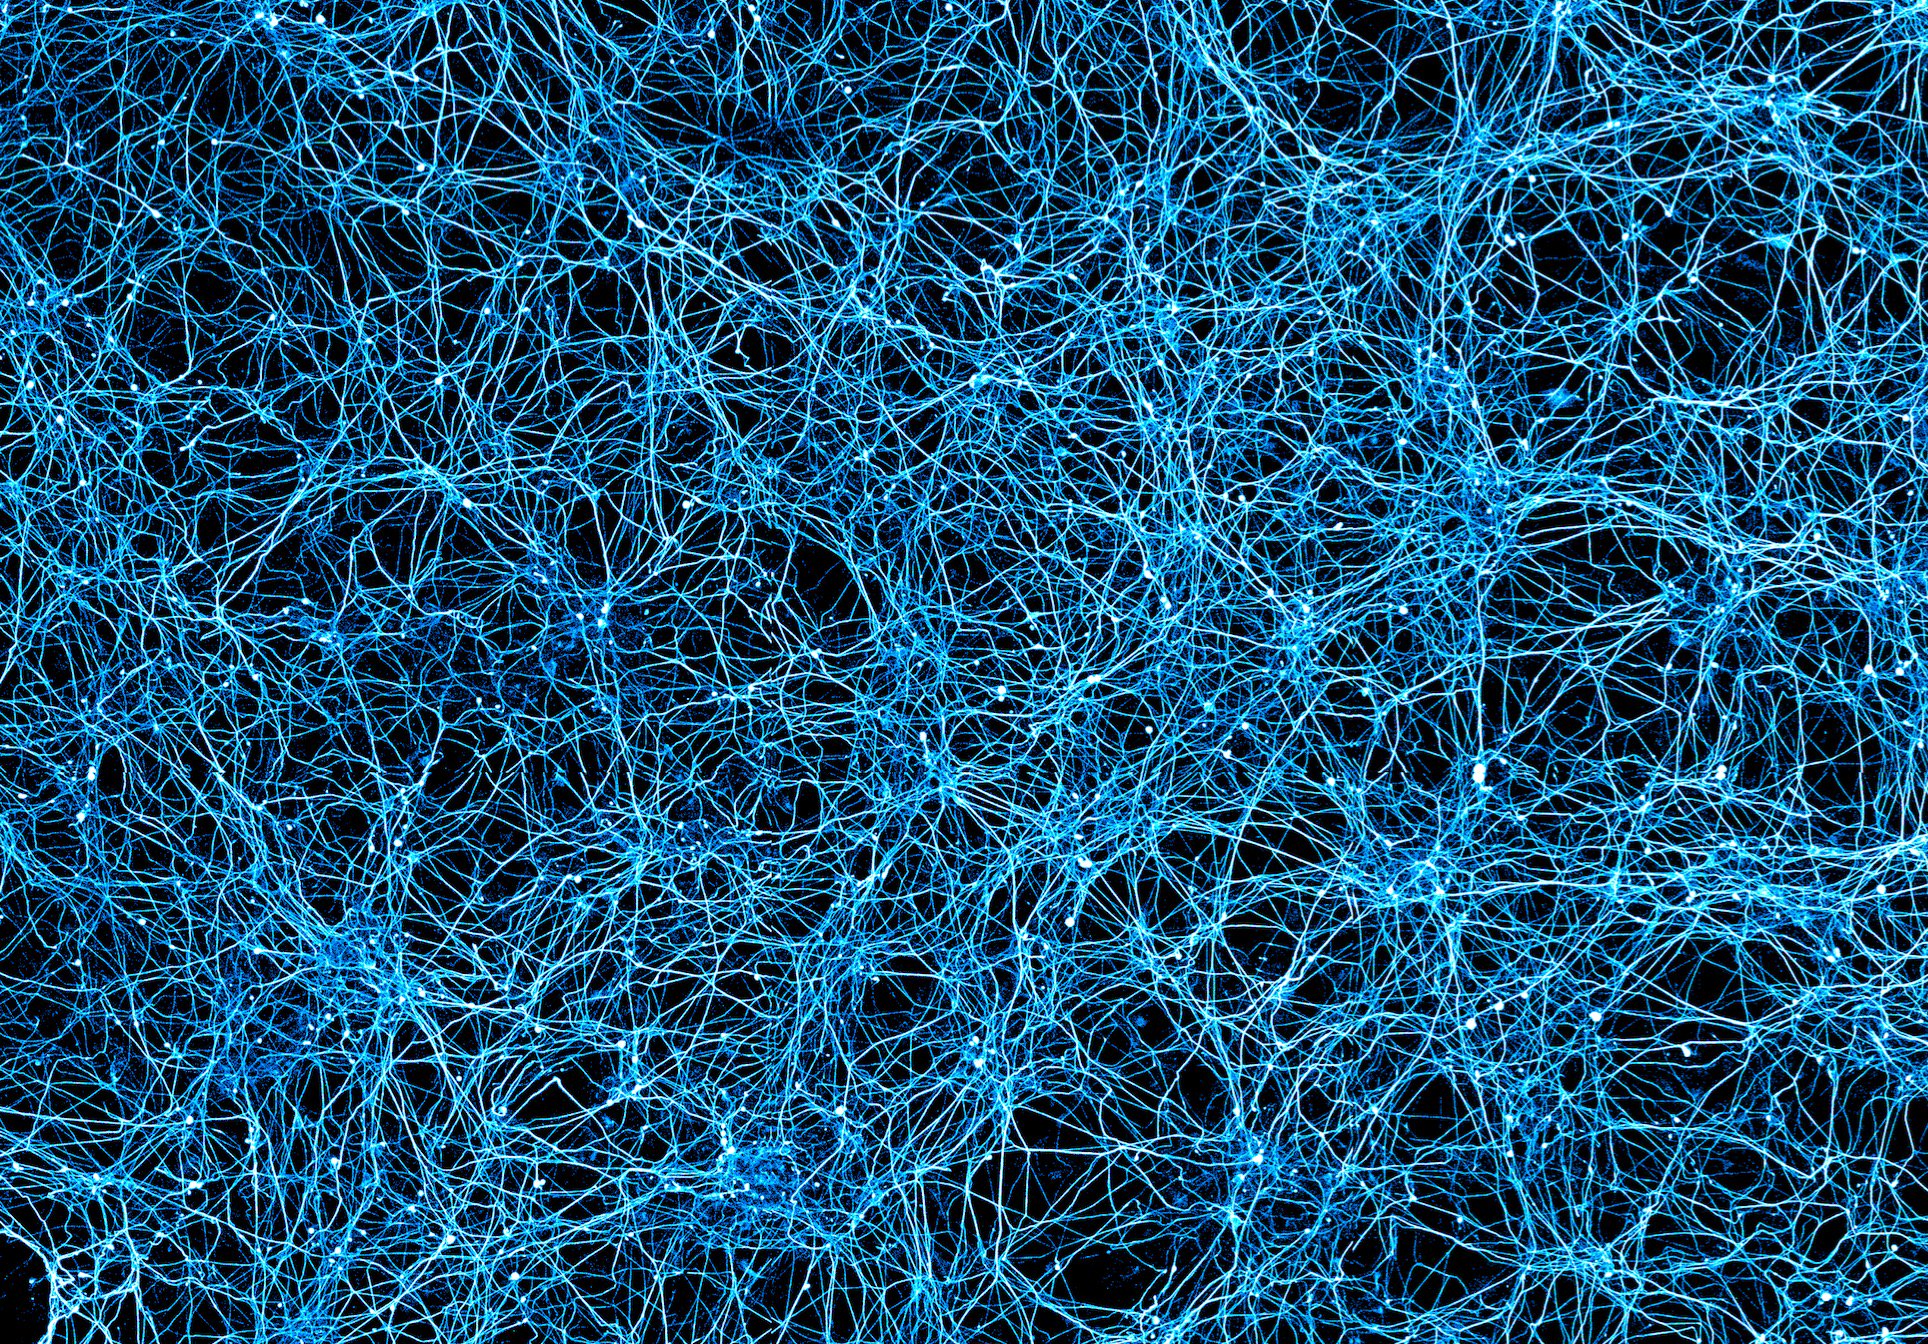 A dense tangle of light blue neurons over a black background